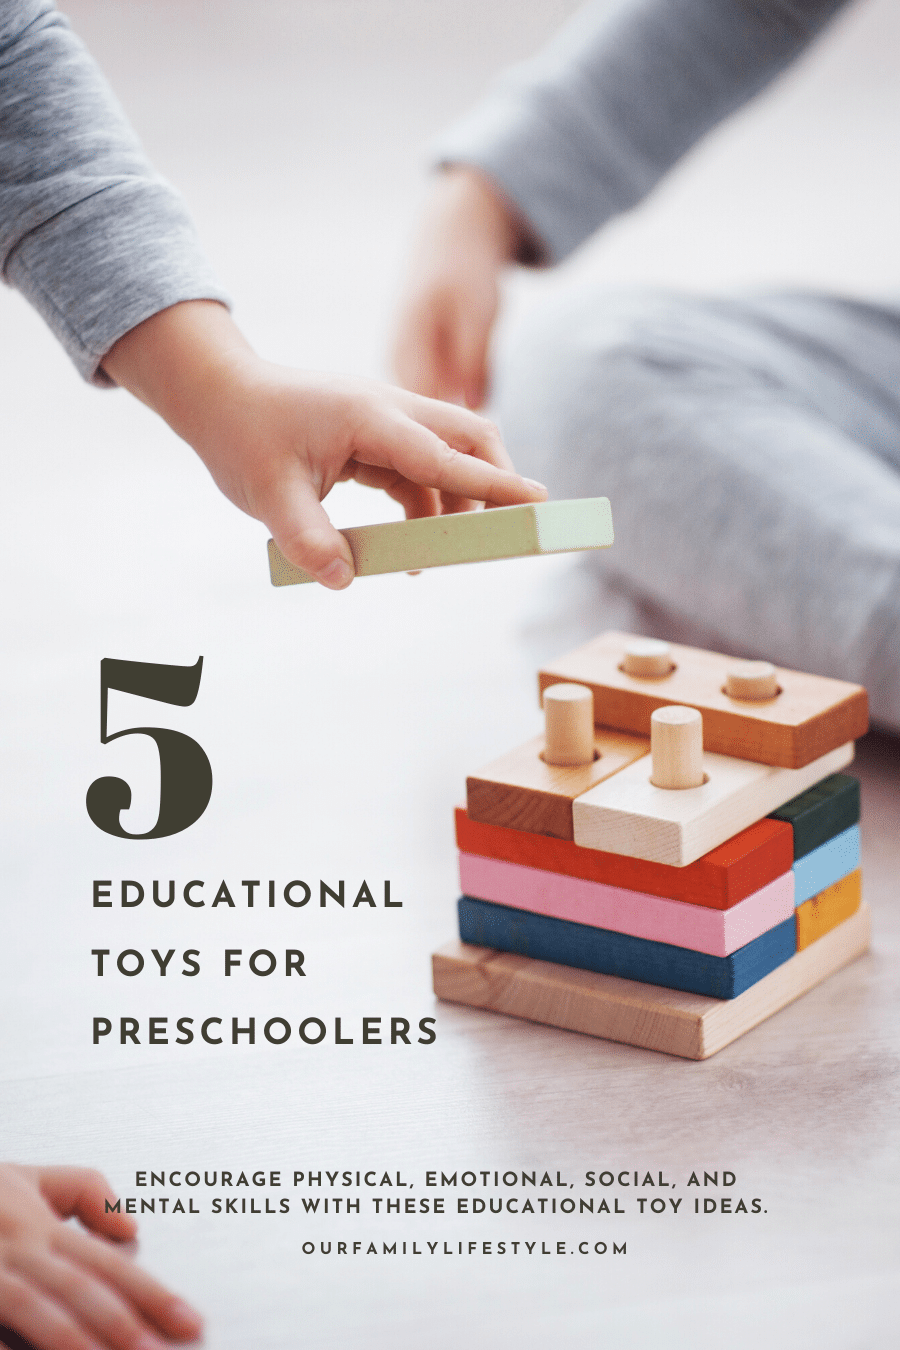 5 Educational Toys for Preschoolers